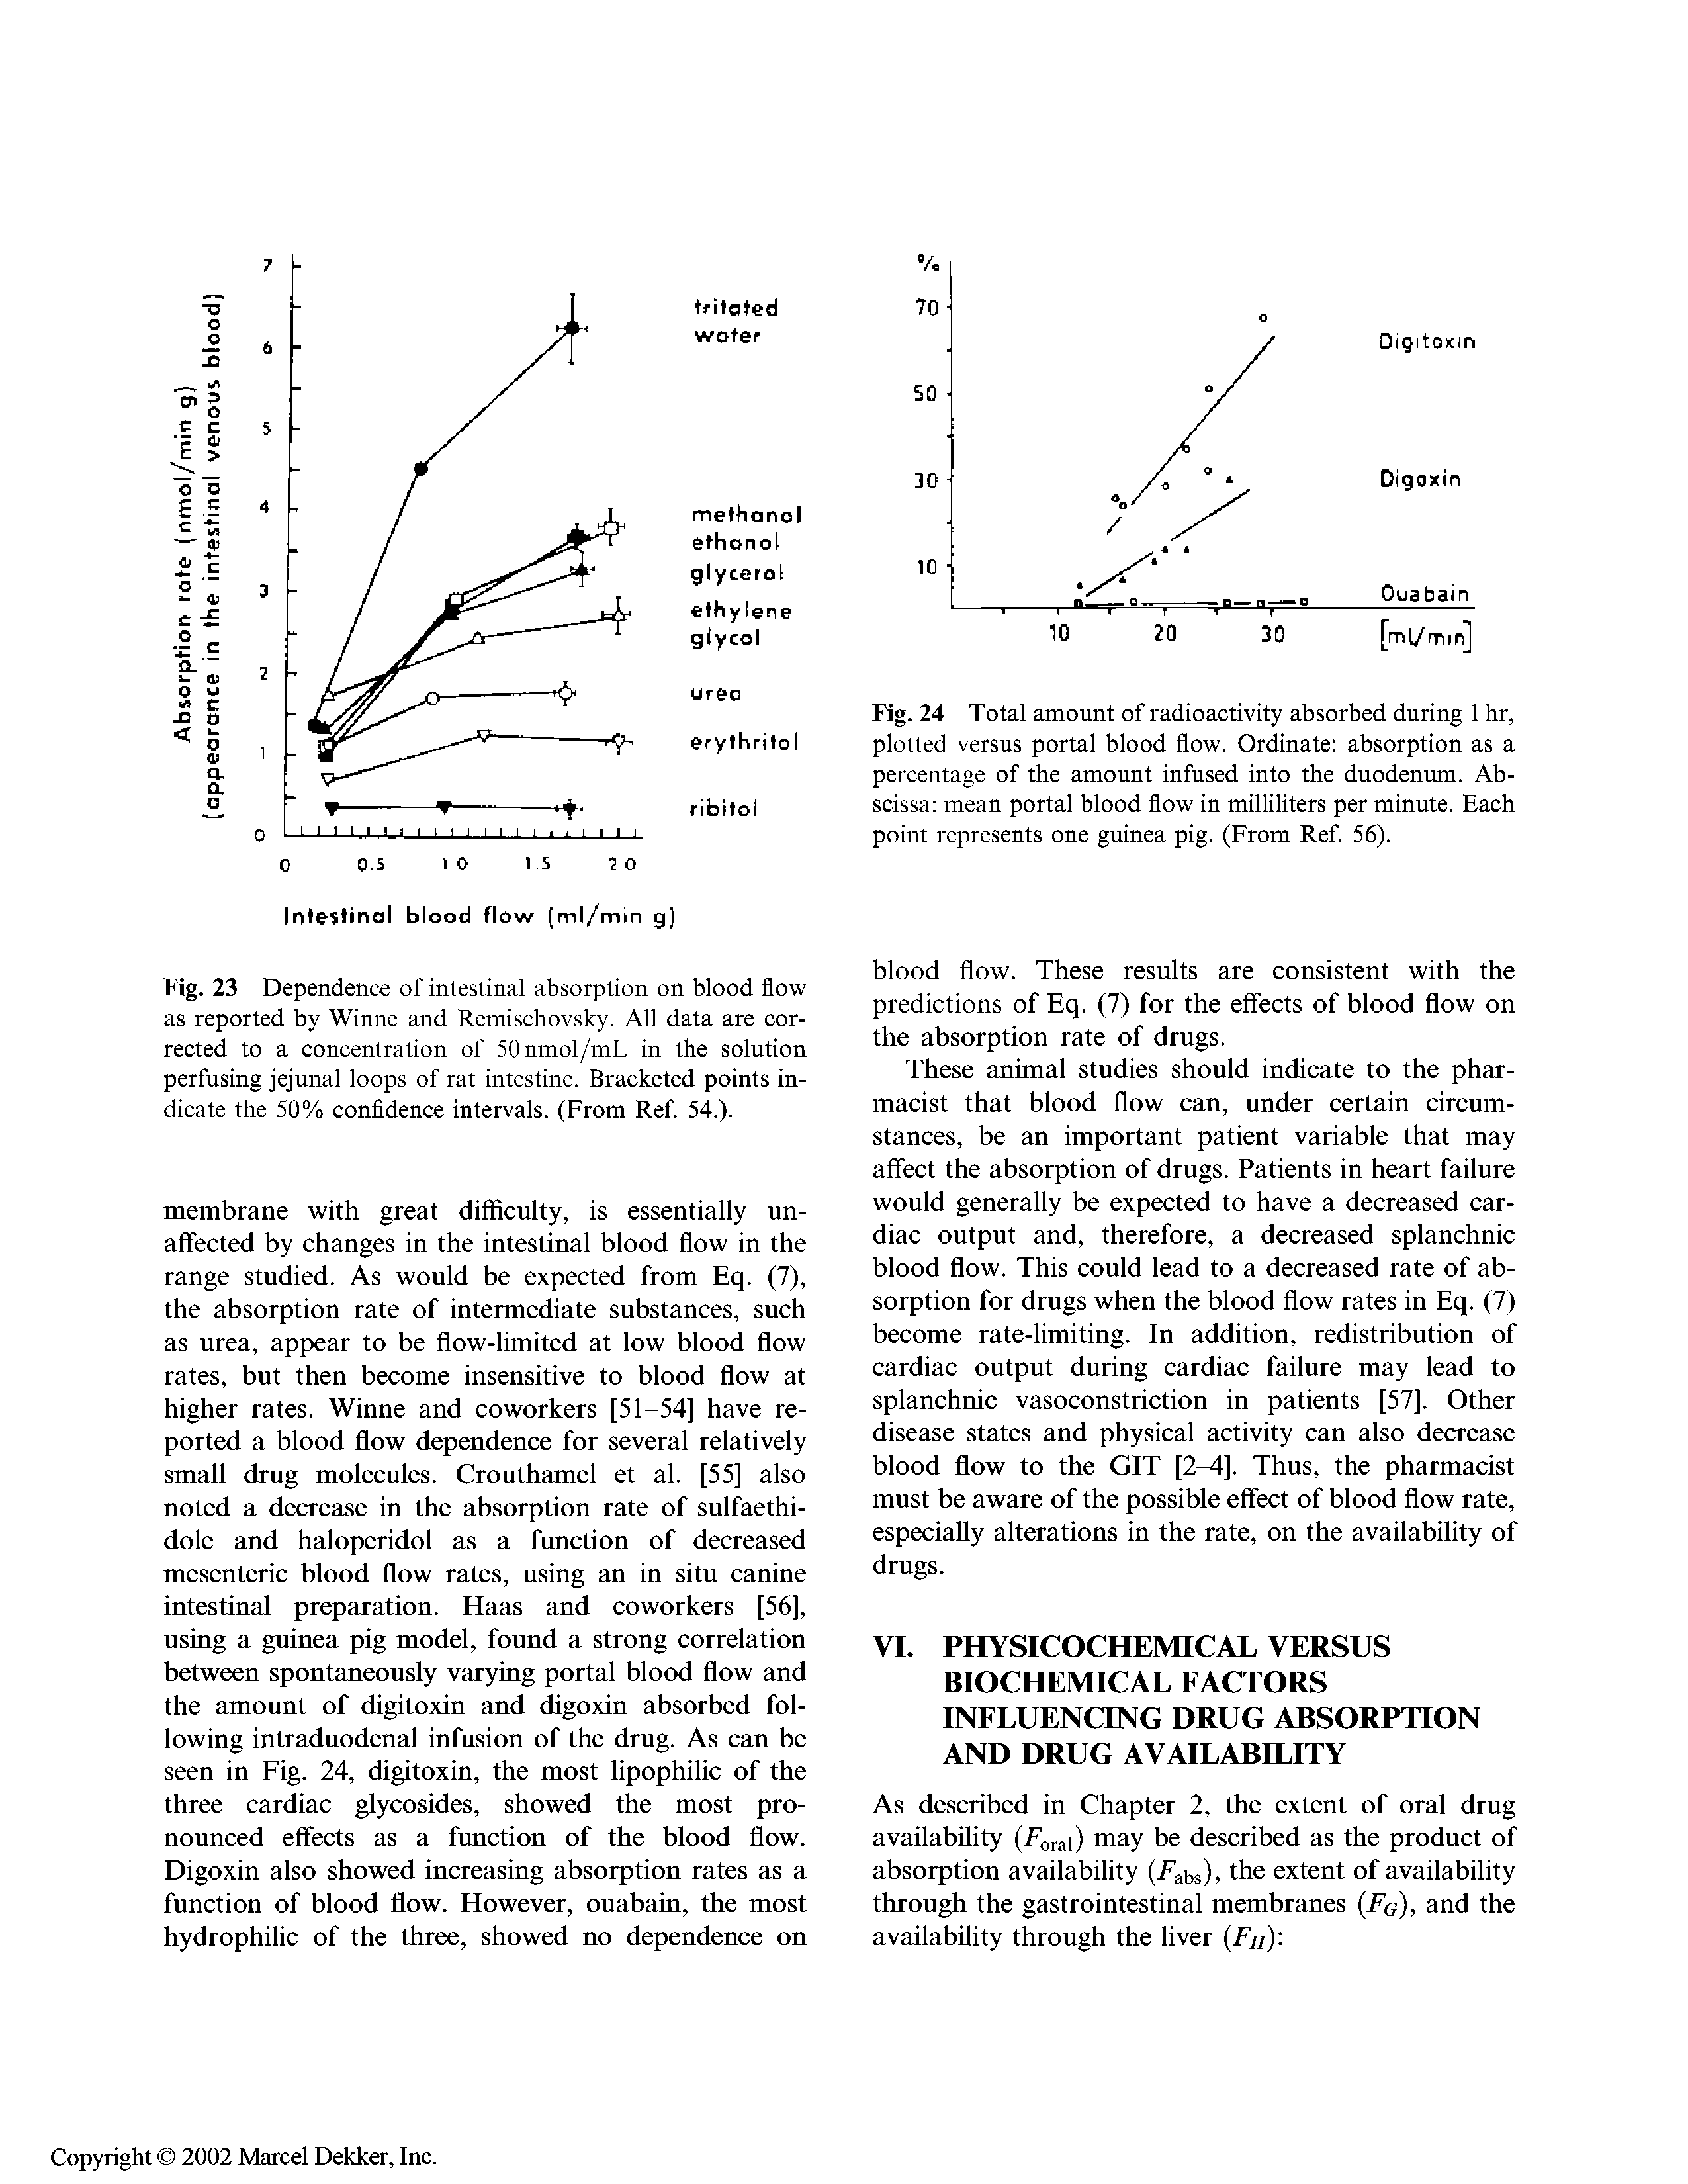 Fig. 23 Dependence of intestinal absorption on blood flow as reported by Winne and Remischovsky. All data are corrected to a concentration of 50 nmol/mL in the solution perfusing jejunal loops of rat intestine. Bracketed points indicate the 50% confidence intervals. (From Ref. 54.).